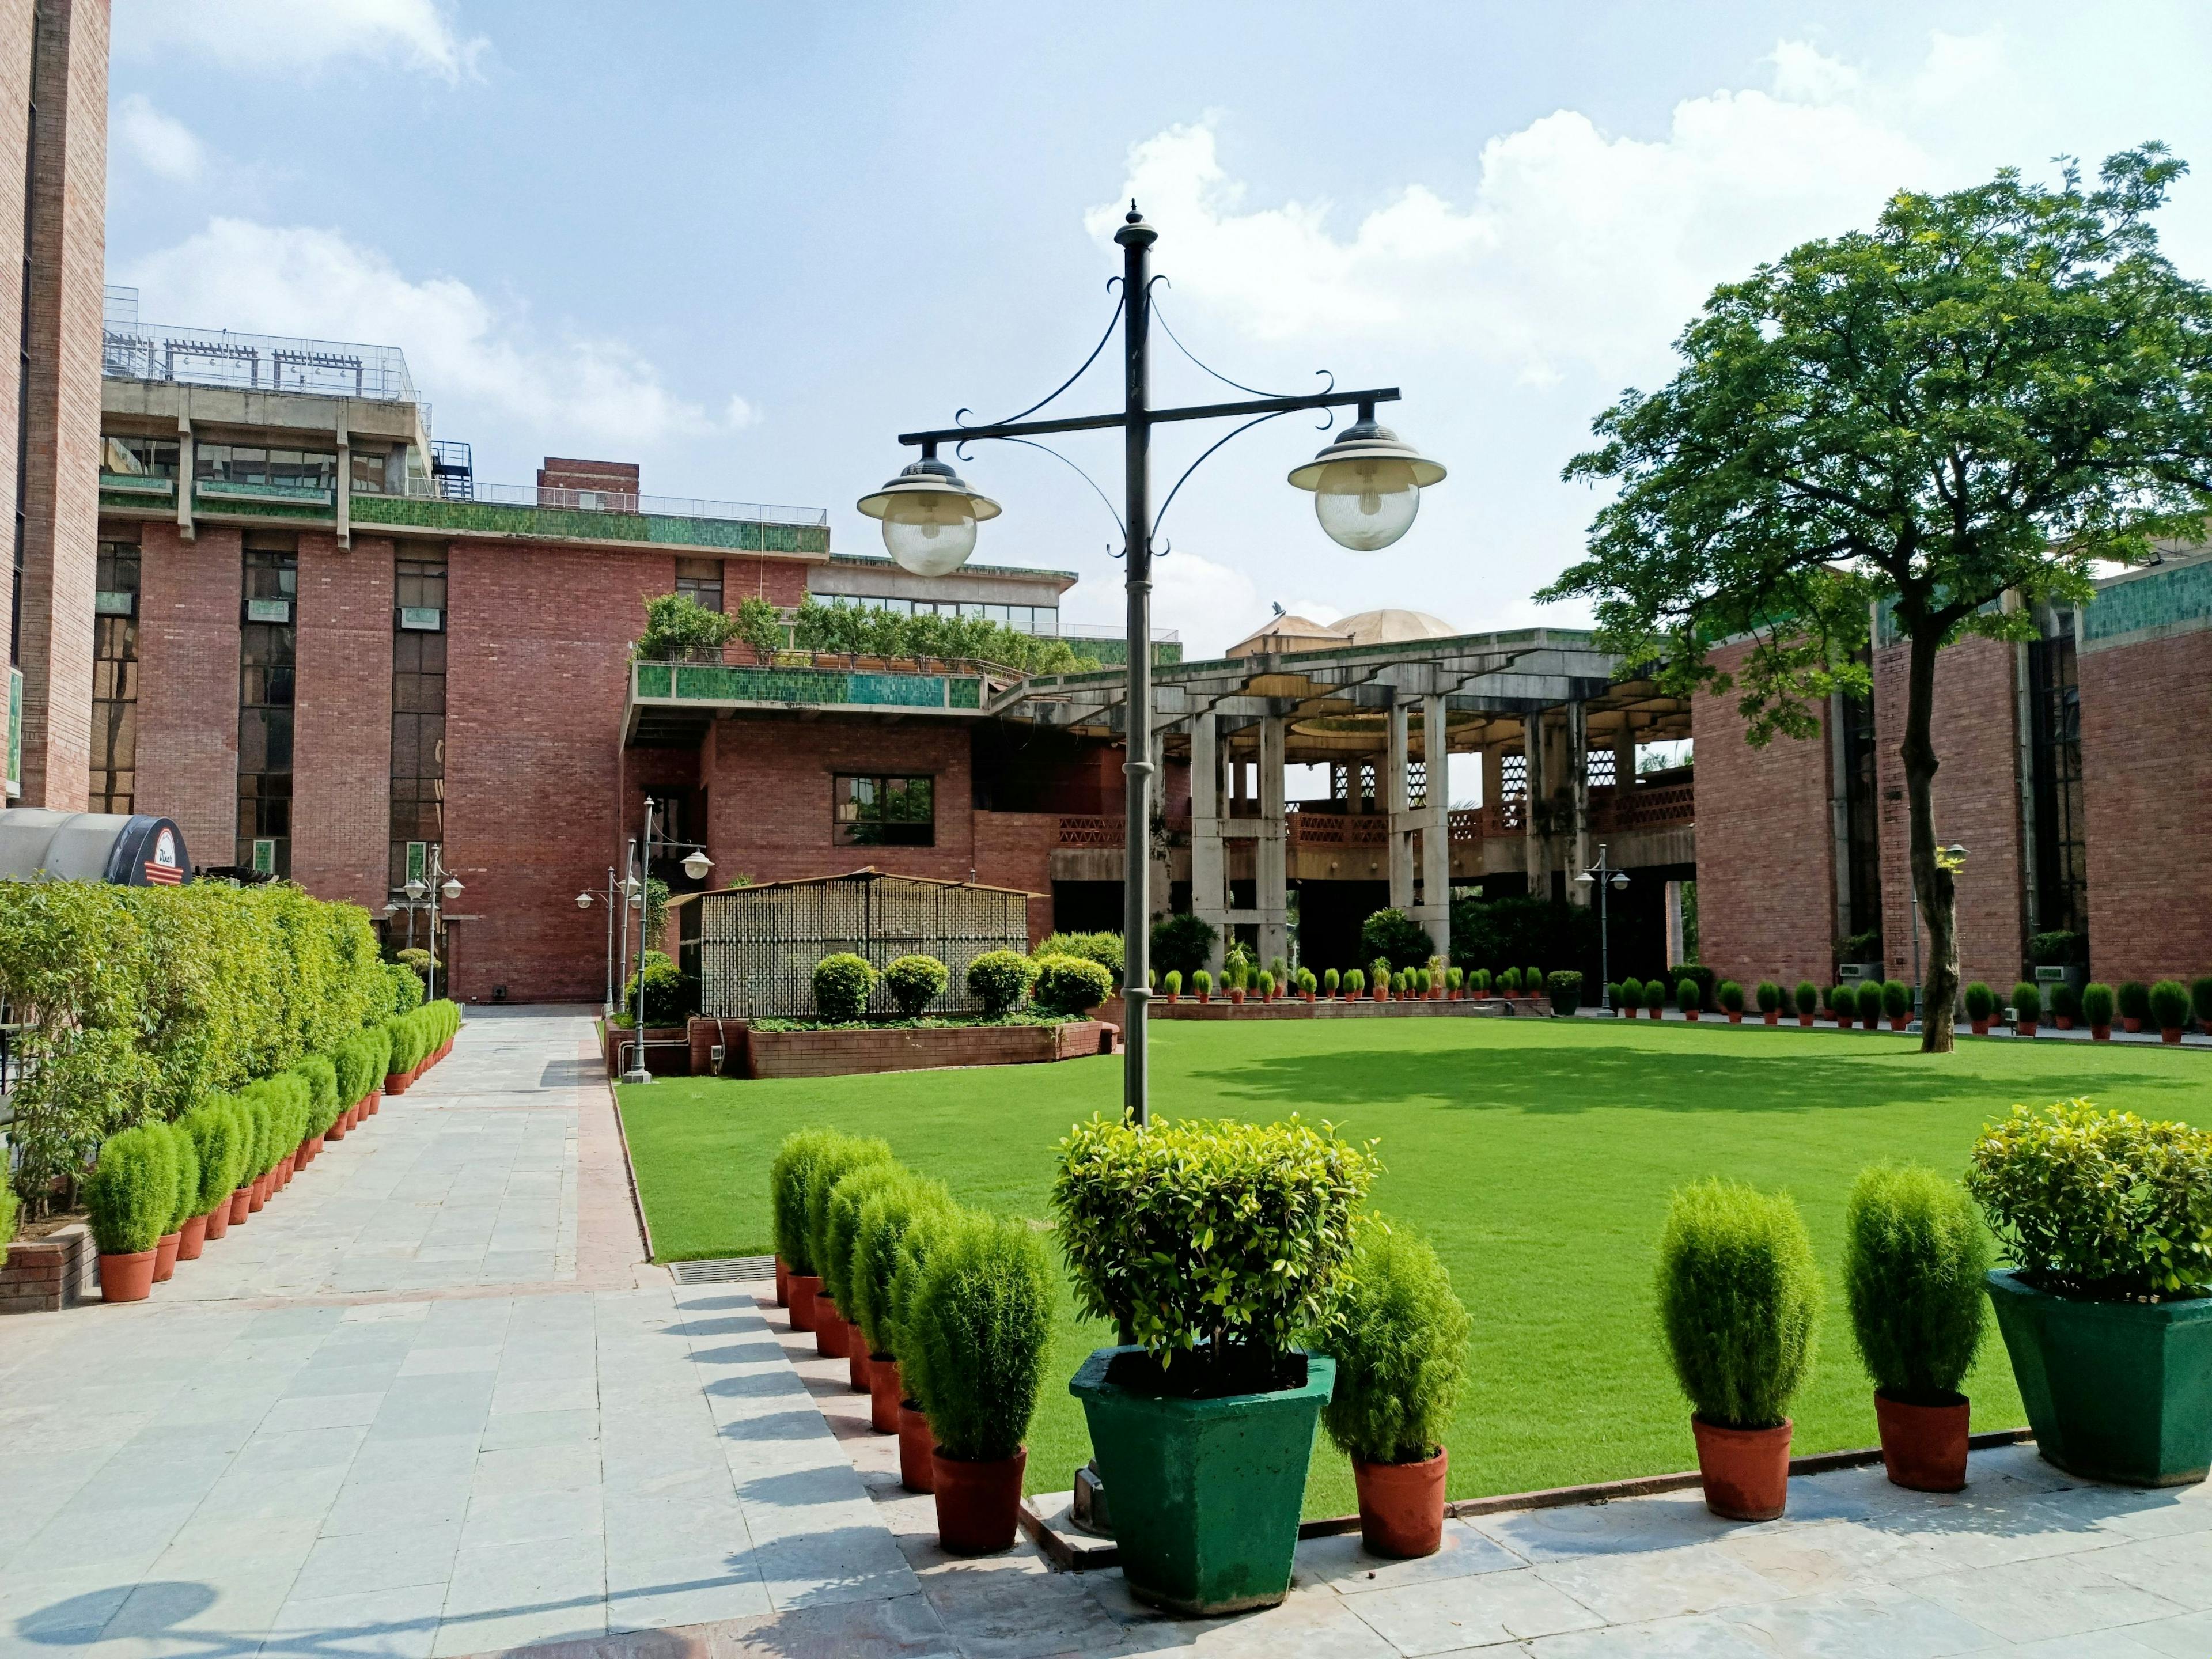 Wide green courtyards surrounded by offices, India Habitat Centre